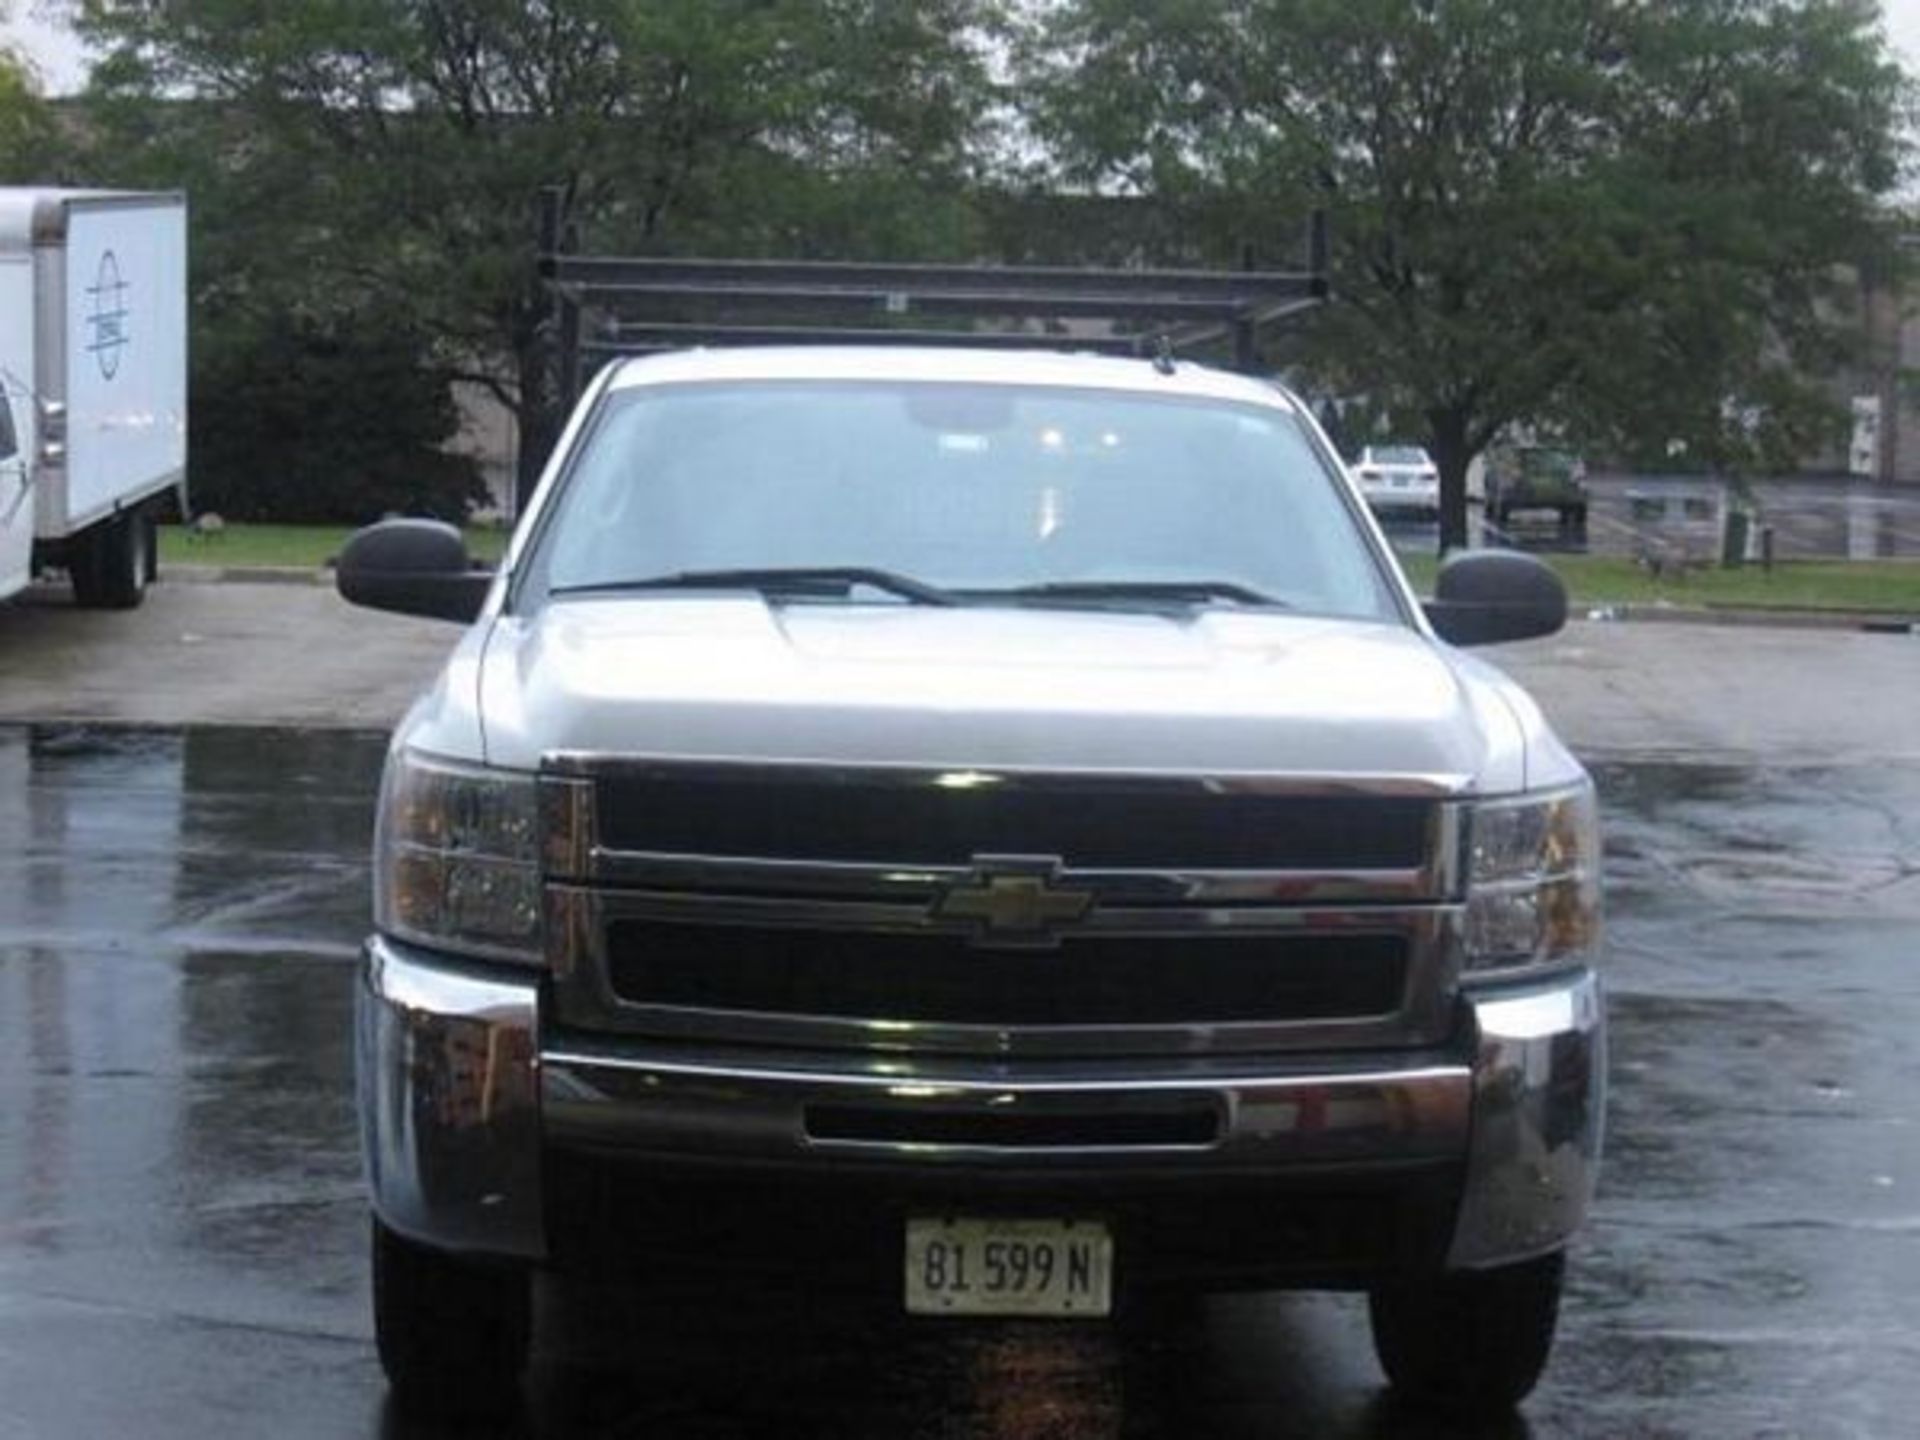 2007 Chevrolet Crew Cab Pick-up Truck, with Rack & Lift Gate, 2500 HD, VIN 1GCHC23K27F524910, 127,32 - Image 3 of 10